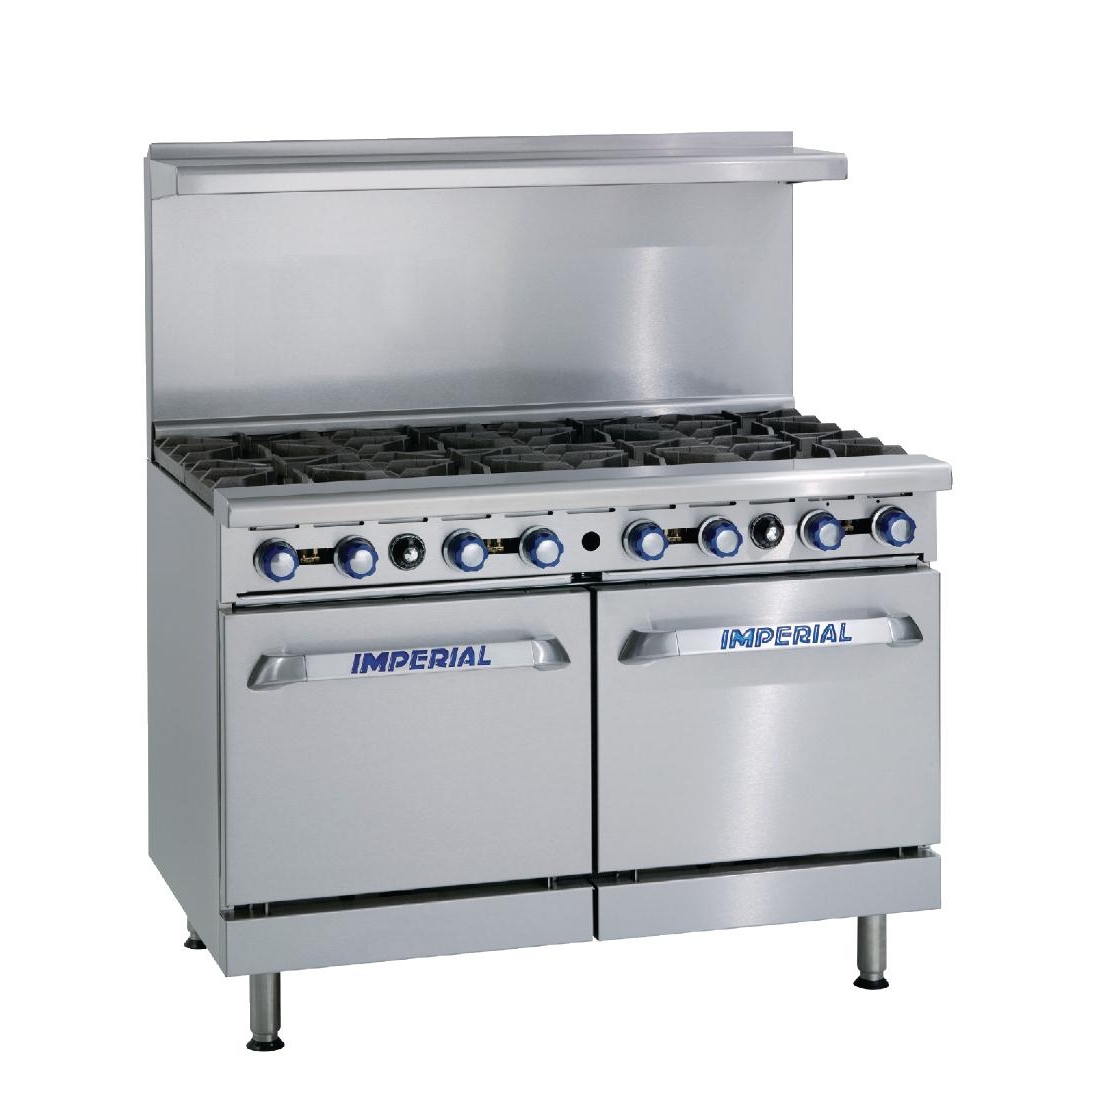 Imperial 8 Burner Double Oven Natural Gas Oven Range IR8-N